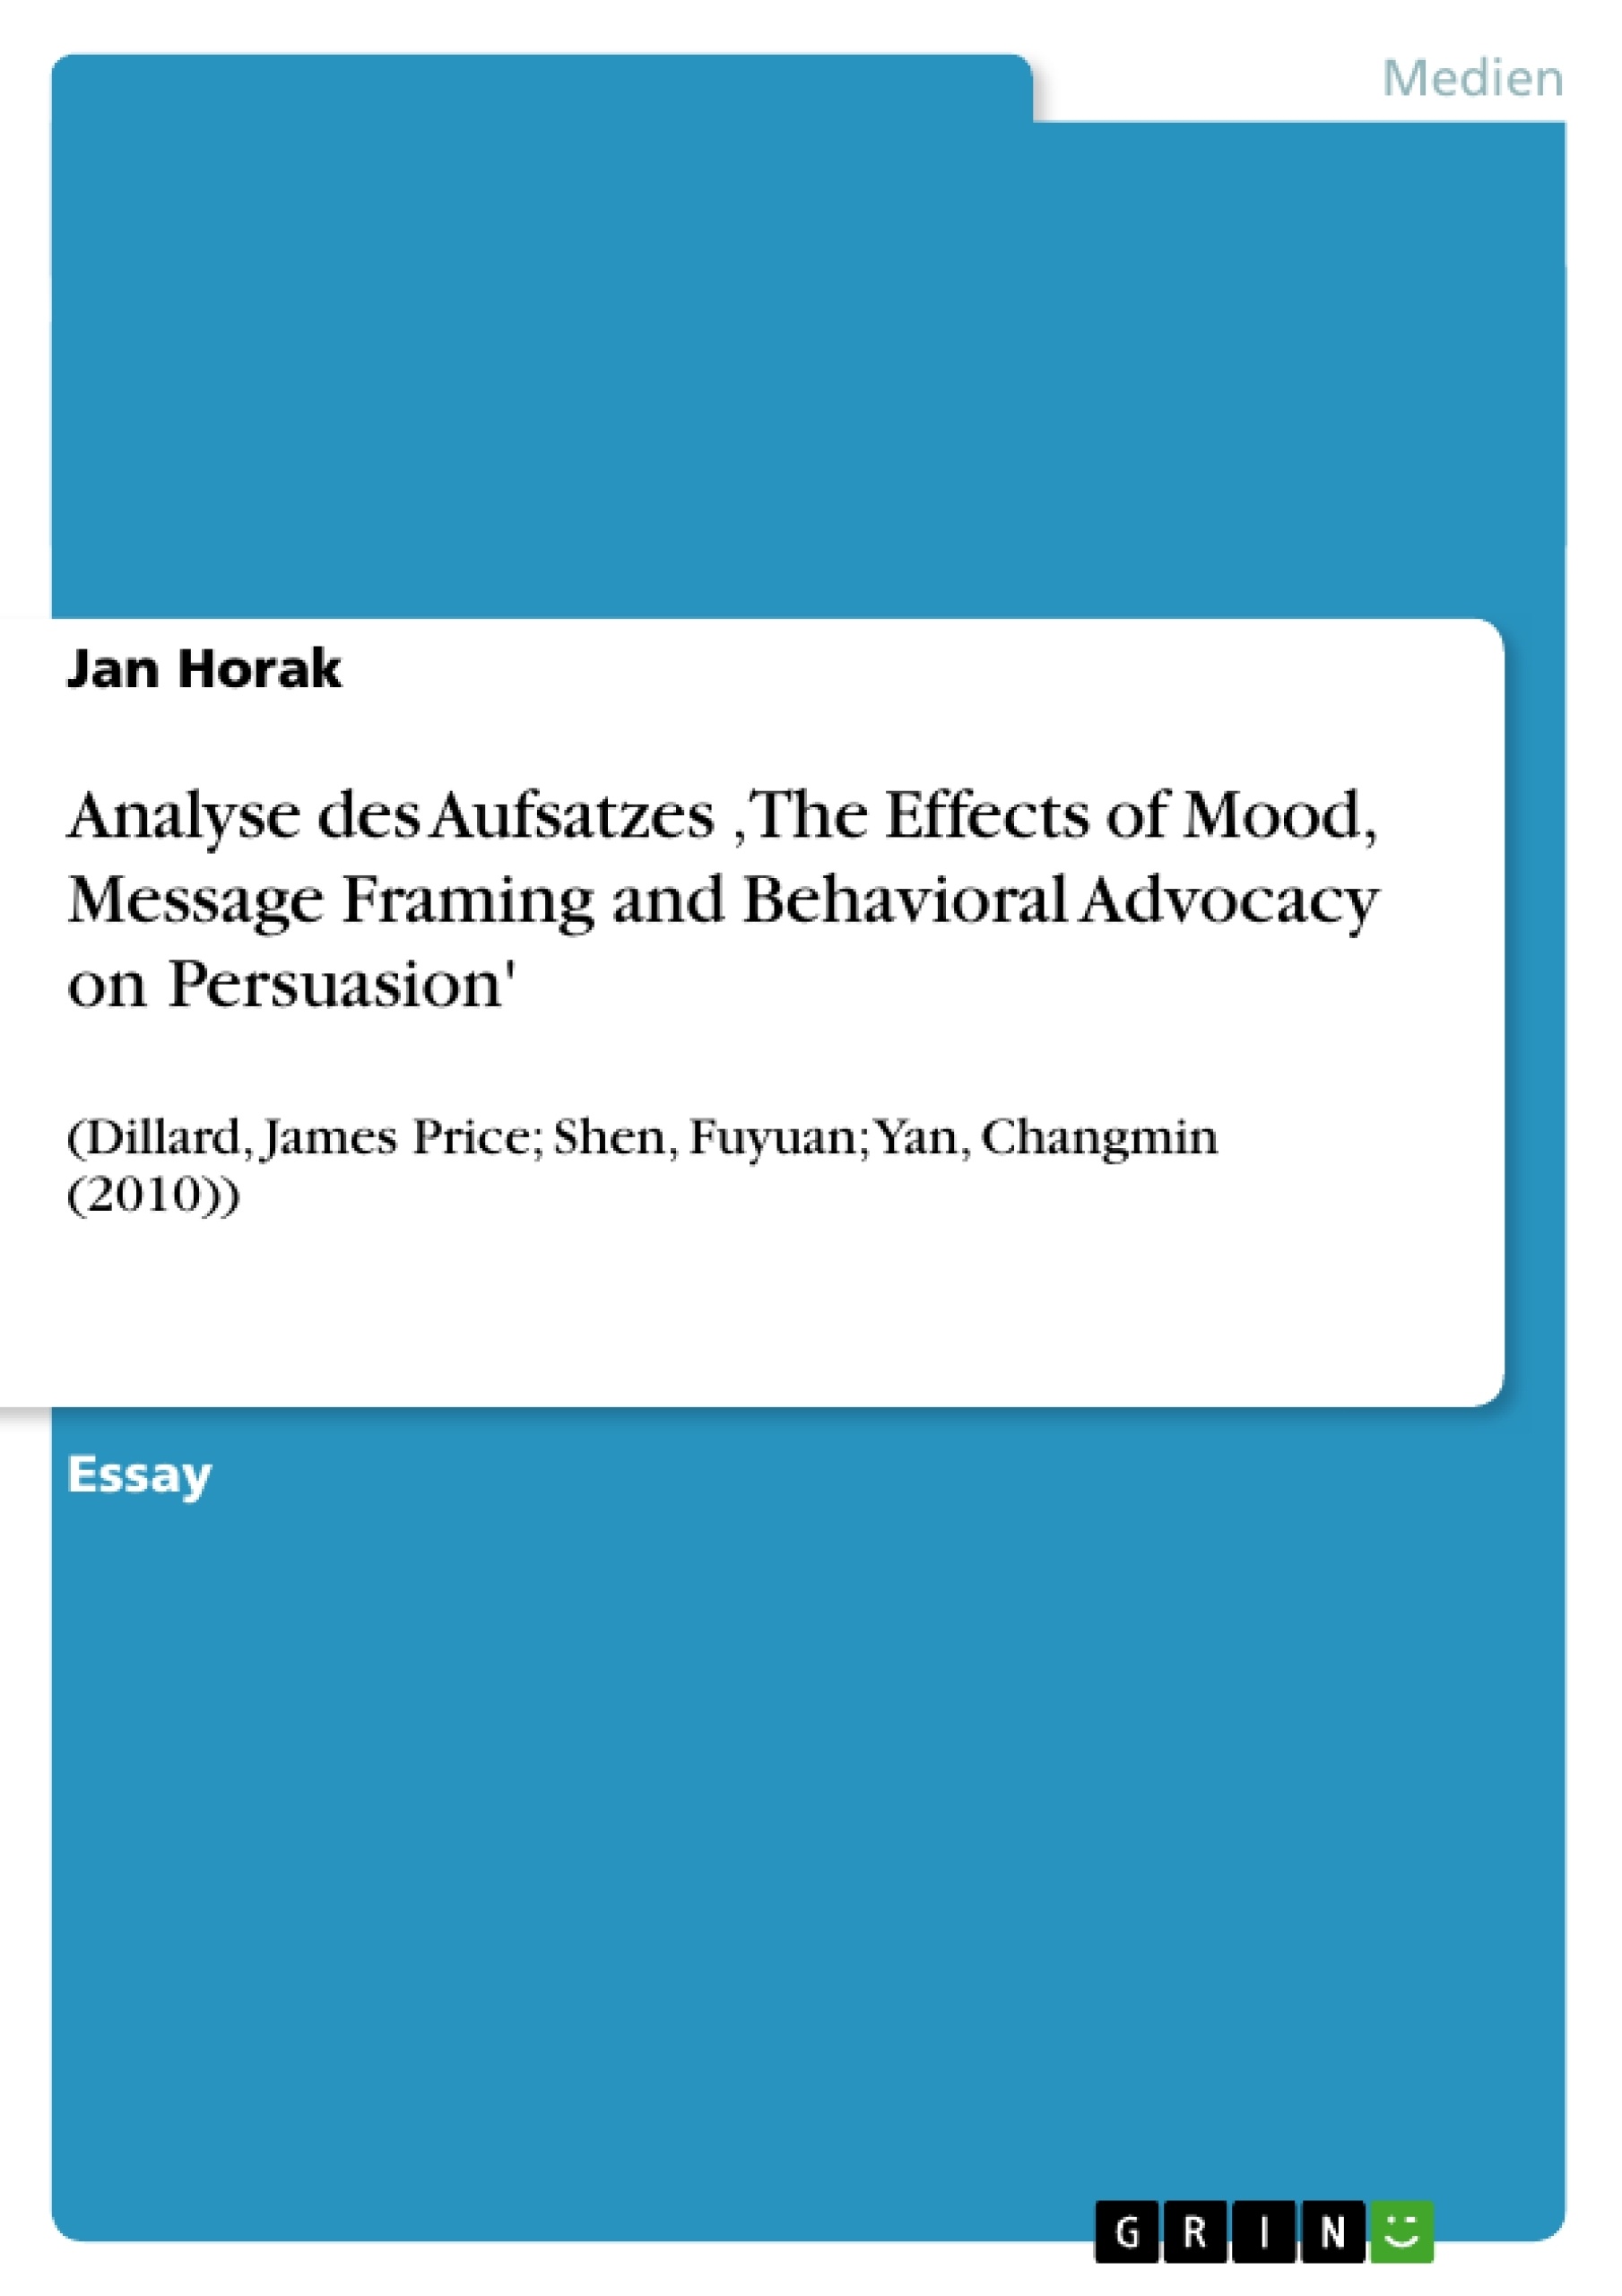 Título: Analyse des Aufsatzes ‚The Effects of Mood, Message Framing and Behavioral Advocacy on Persuasion'